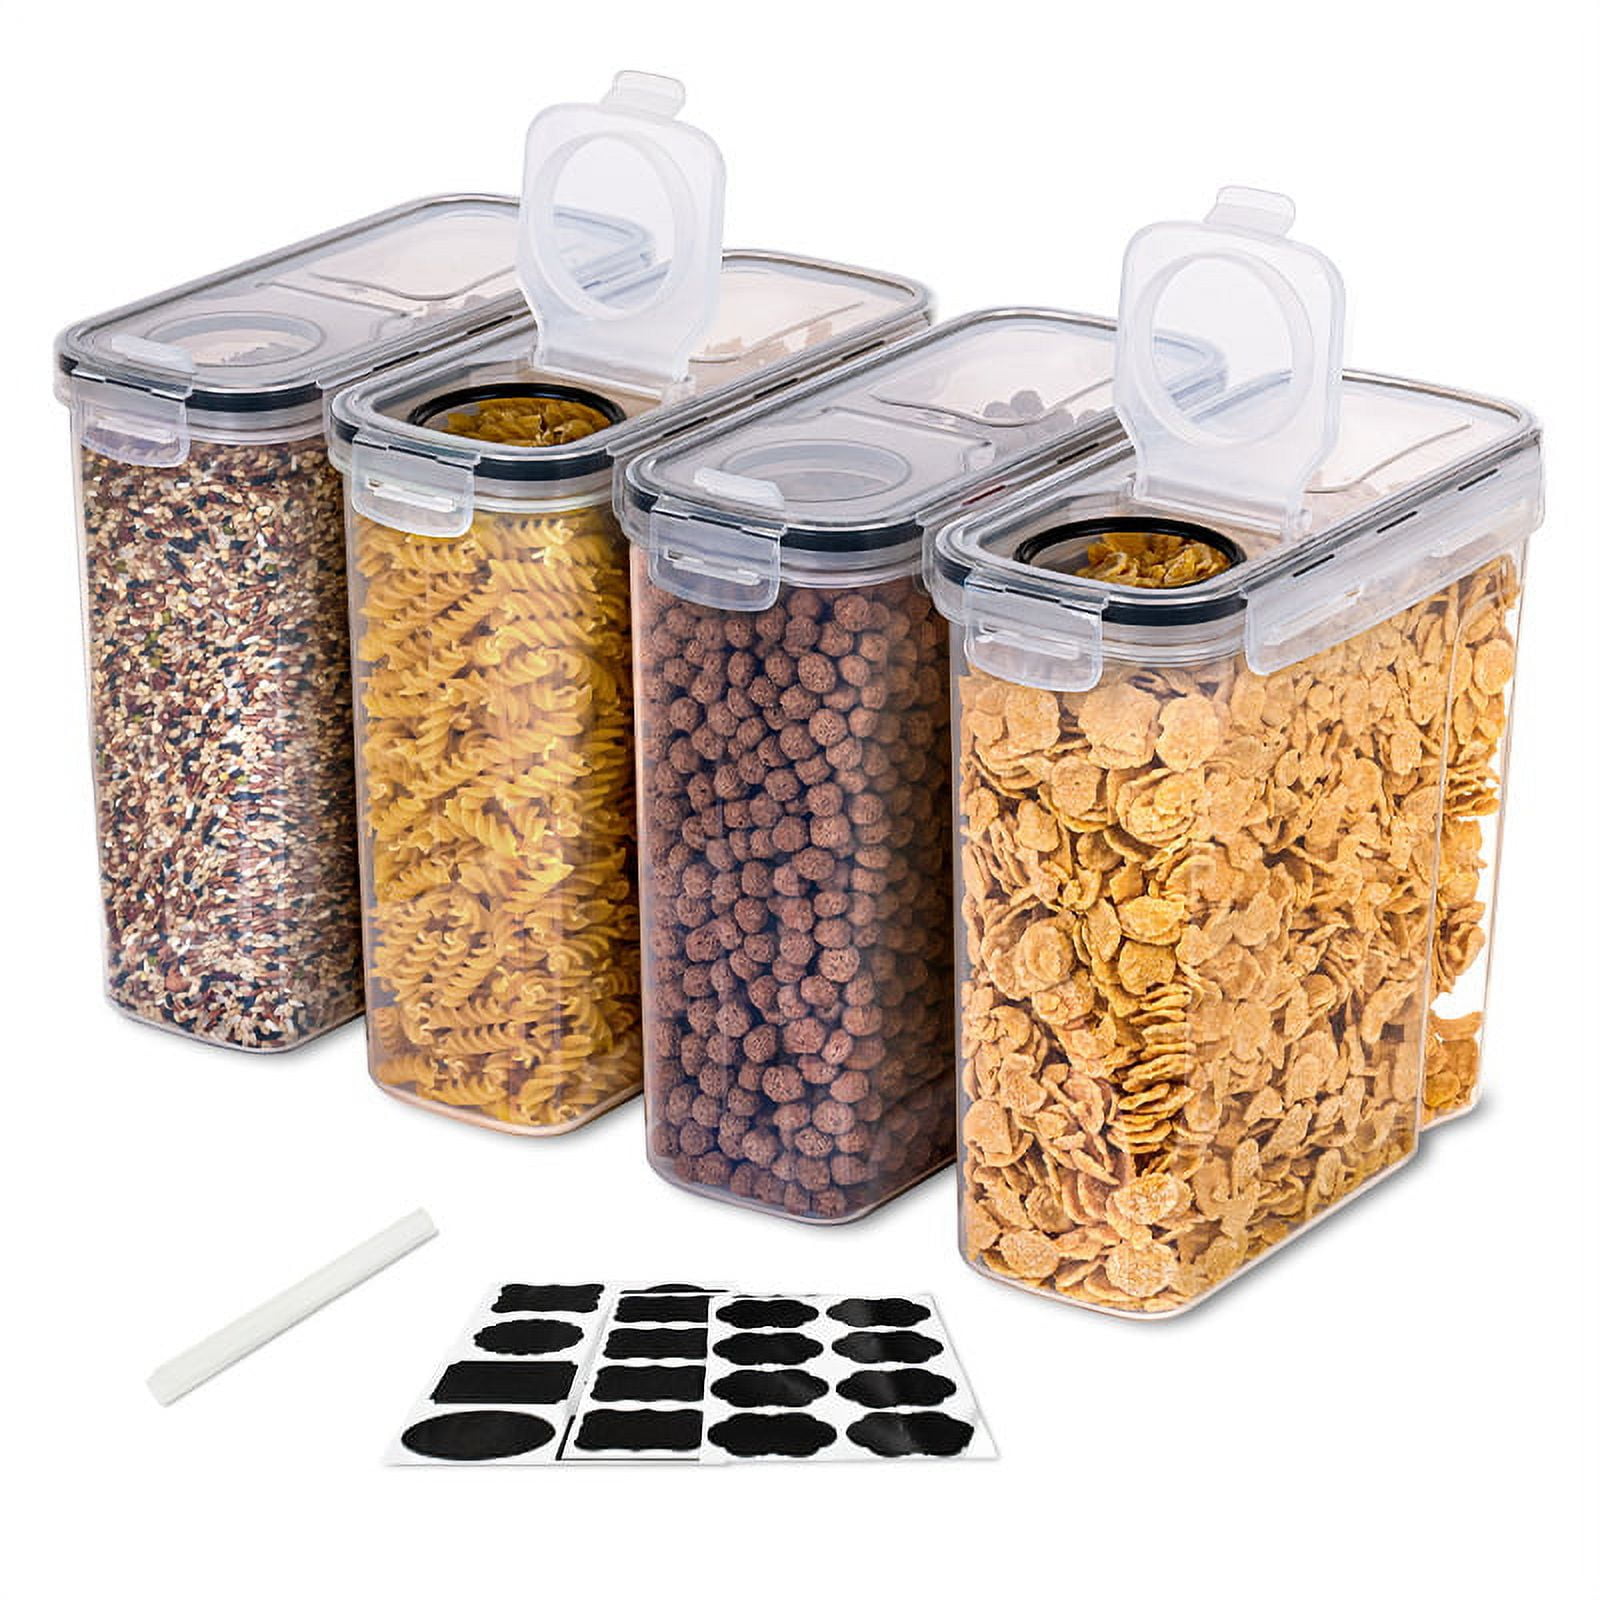 8 Piece Cereal Keeper